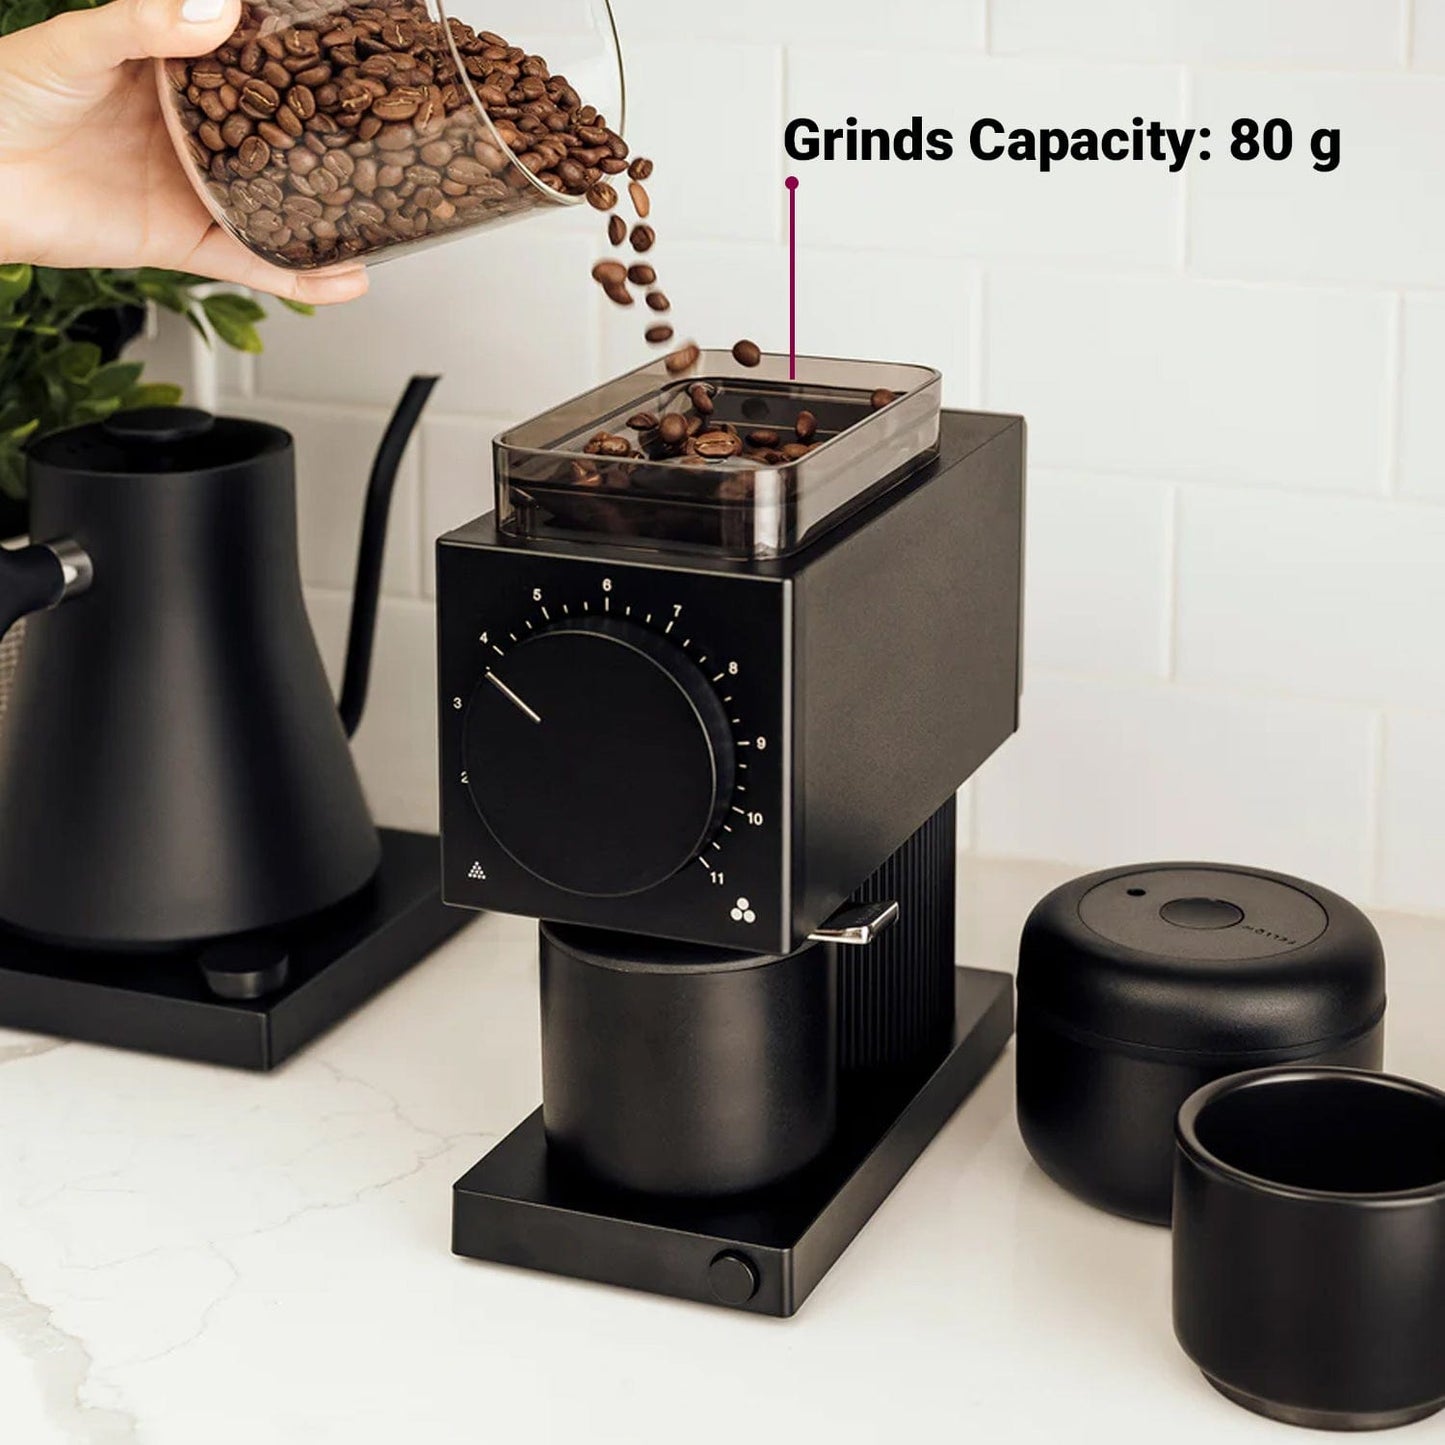 Fellow Fellow Stagg EKG black with Ode Gen1 Electric Coffee grinder